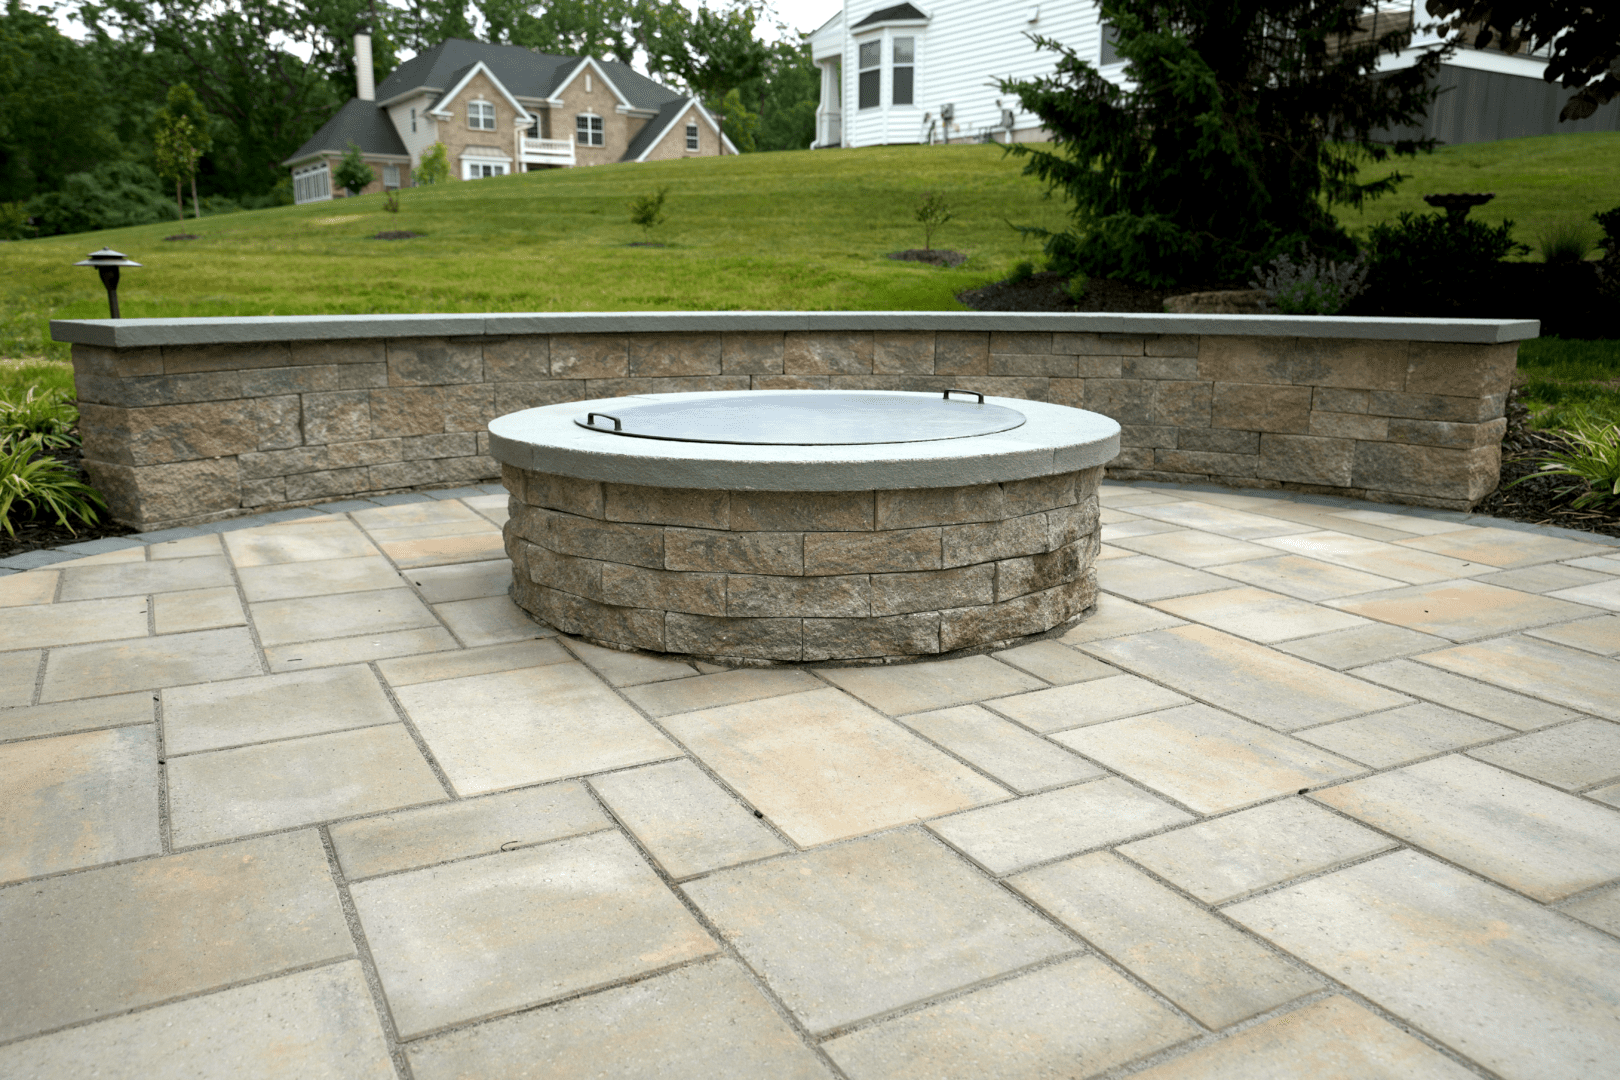 A beautifully crafted hardscape design with a stone patio featuring a cozy fire pit in the middle.